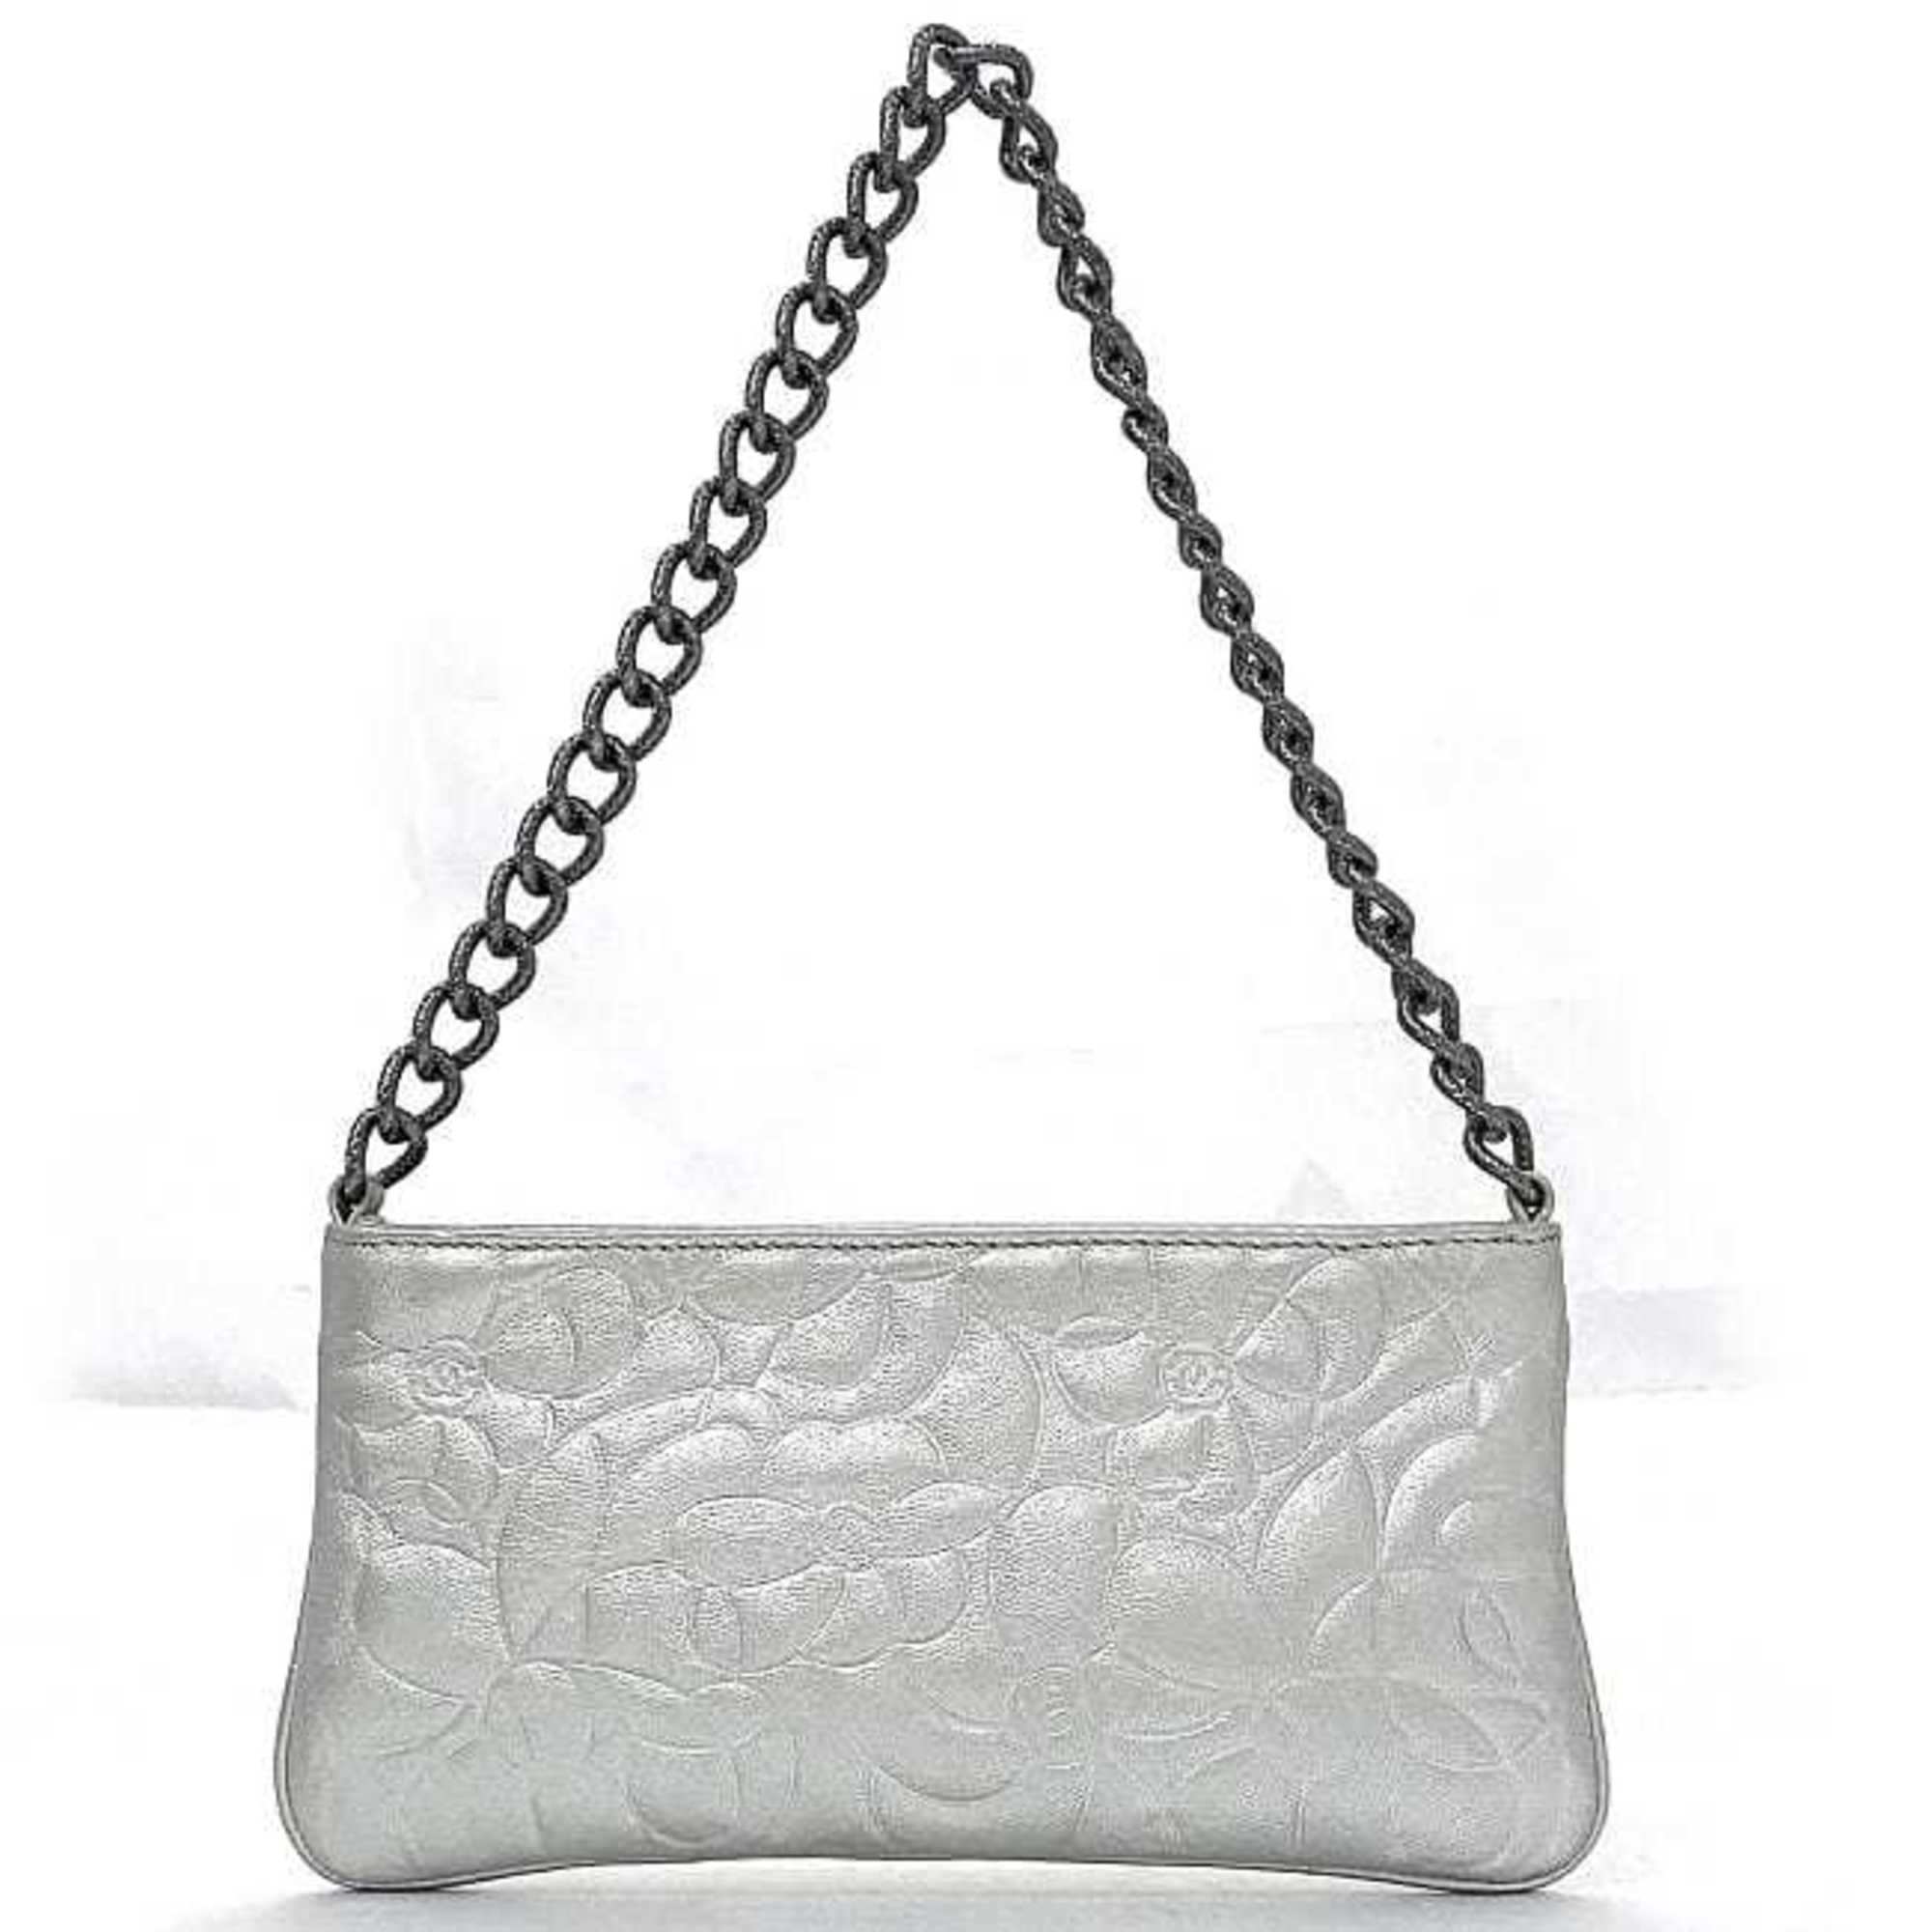 CHANEL Silver Camellia Leather Metal No. 8 Chain Embossed Pouch Flower Pattern Handle Included